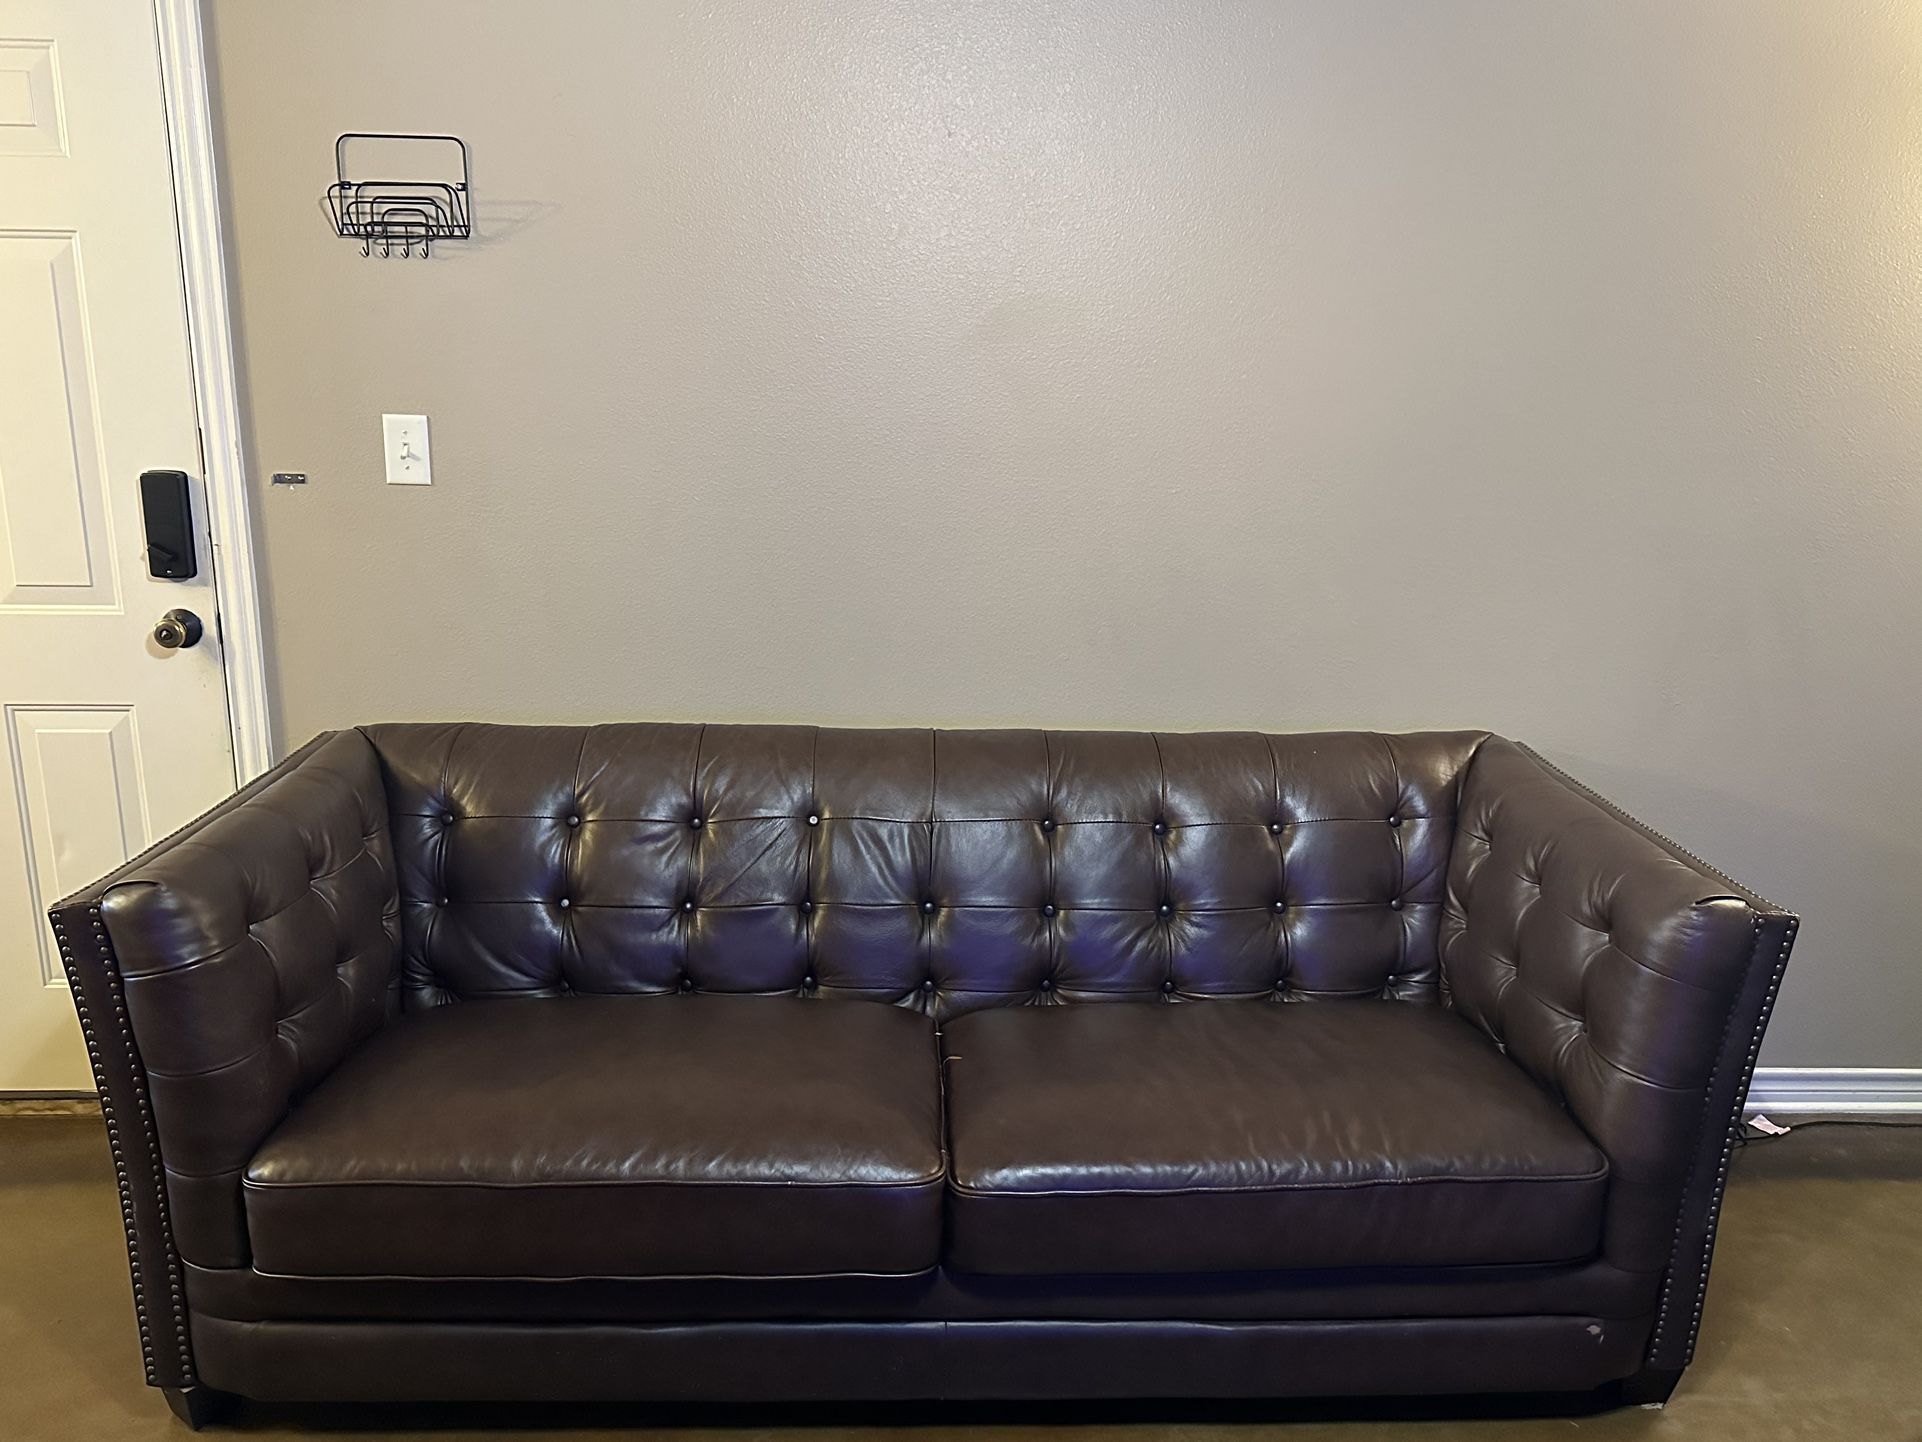 Couch and loveseat for sale